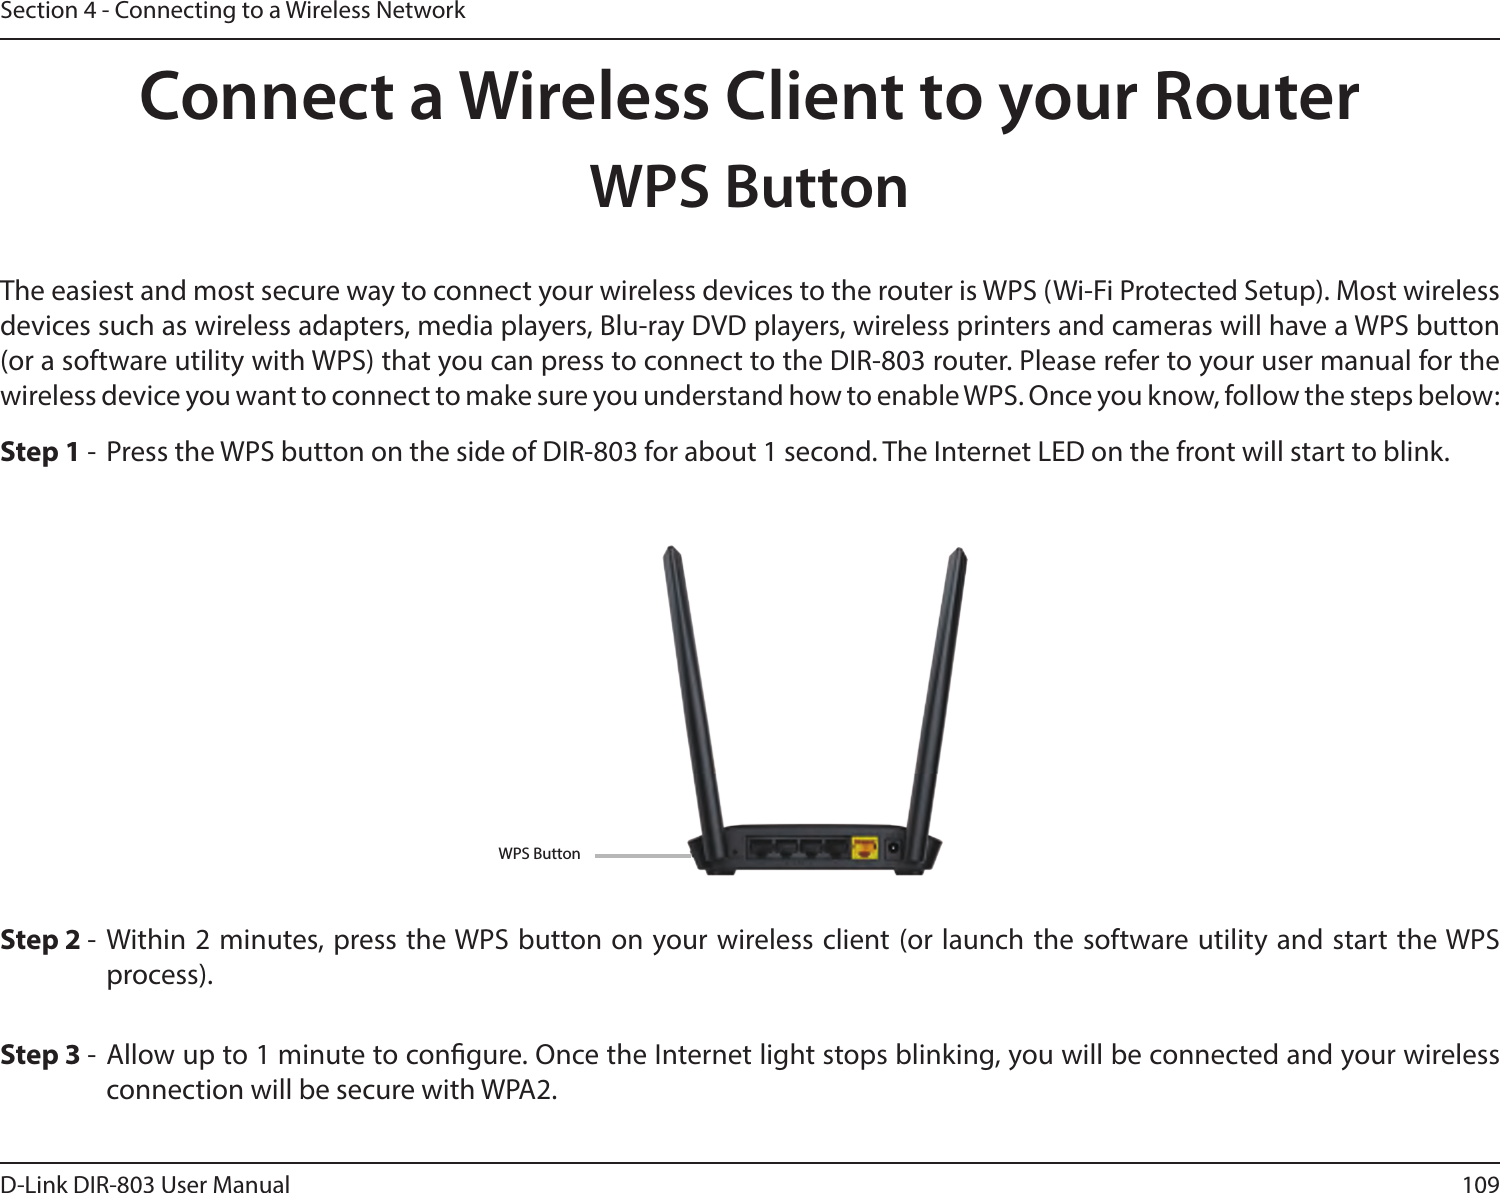 109D-Link DIR-803 User ManualSection 4 - Connecting to a Wireless NetworkConnect a Wireless Client to your RouterWPS ButtonStep 2 - Within 2 minutes, press the WPS button on your wireless client (or launch the software utility and start the WPS process).The easiest and most secure way to connect your wireless devices to the router is WPS (Wi-Fi Protected Setup). Most wireless devices such as wireless adapters, media players, Blu-ray DVD players, wireless printers and cameras will have a WPS button (or a software utility with WPS) that you can press to connect to the DIR-803 router. Please refer to your user manual for the wireless device you want to connect to make sure you understand how to enable WPS. Once you know, follow the steps below:Step 1 -  Press the WPS button on the side of DIR-803 for about 1 second. The Internet LED on the front will start to blink.Step 3 - Allow up to 1 minute to congure. Once the Internet light stops blinking, you will be connected and your wireless connection will be secure with WPA2.WPS Button